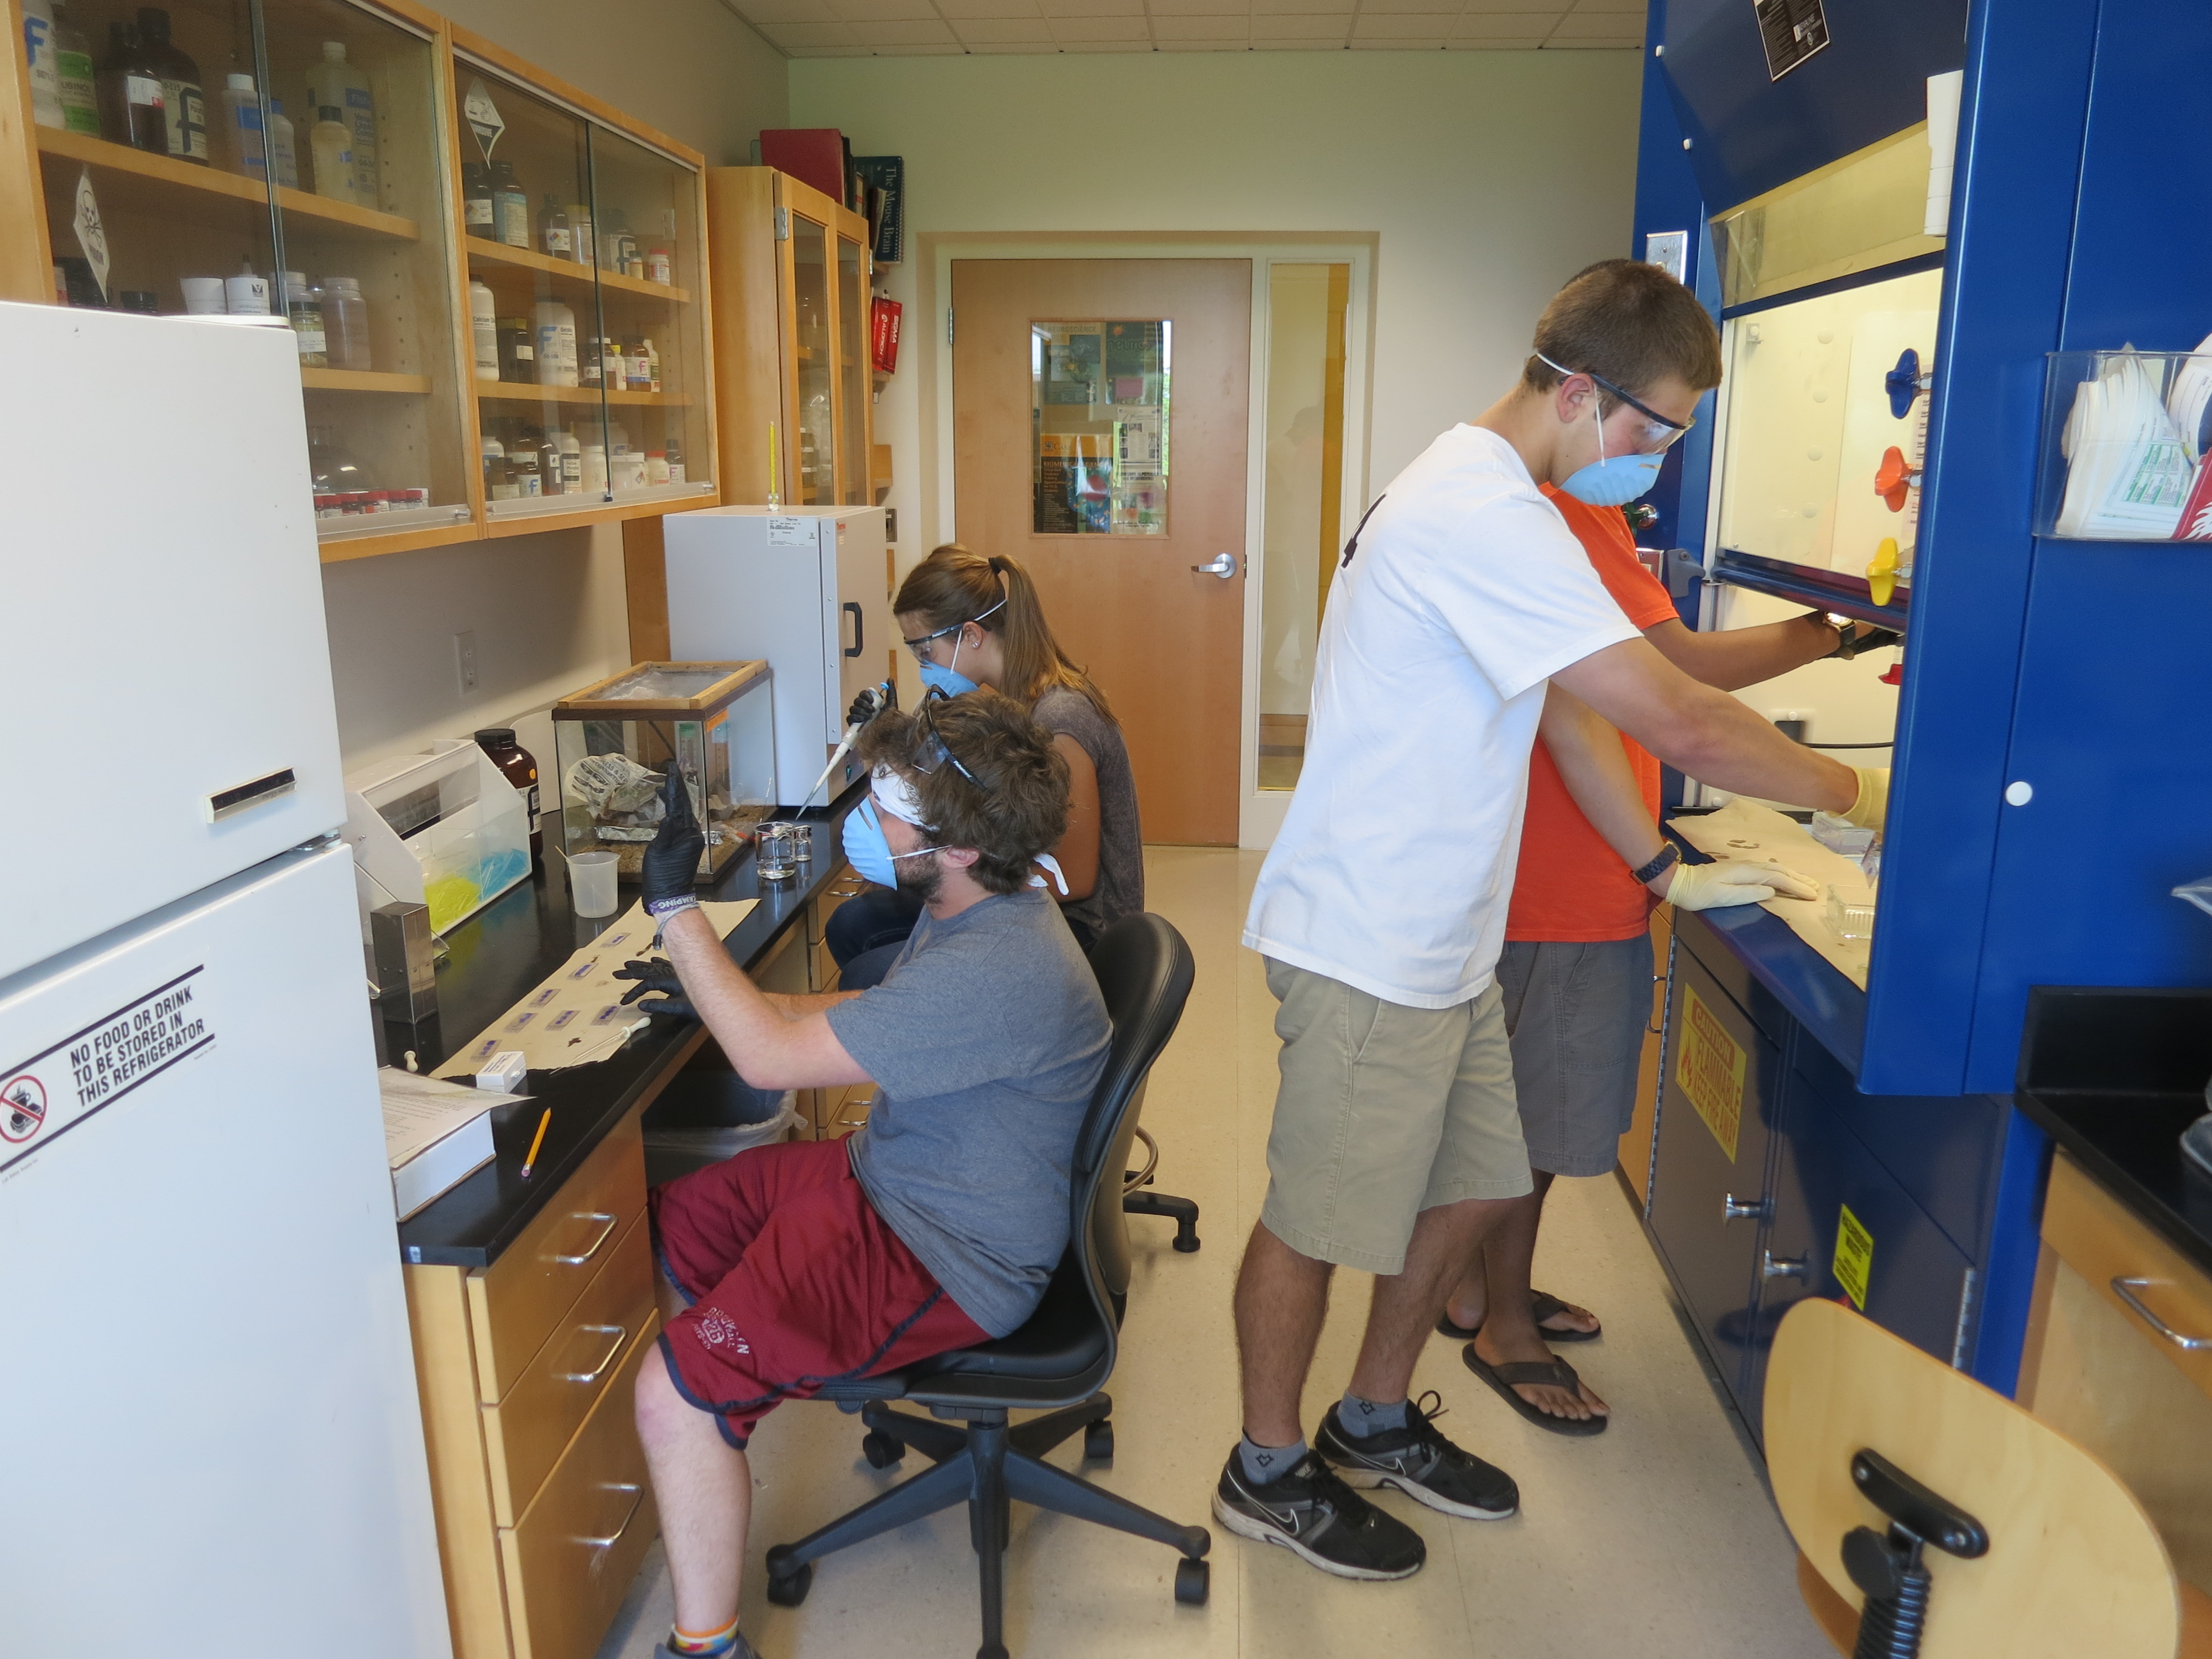 Student researchers in the lab.